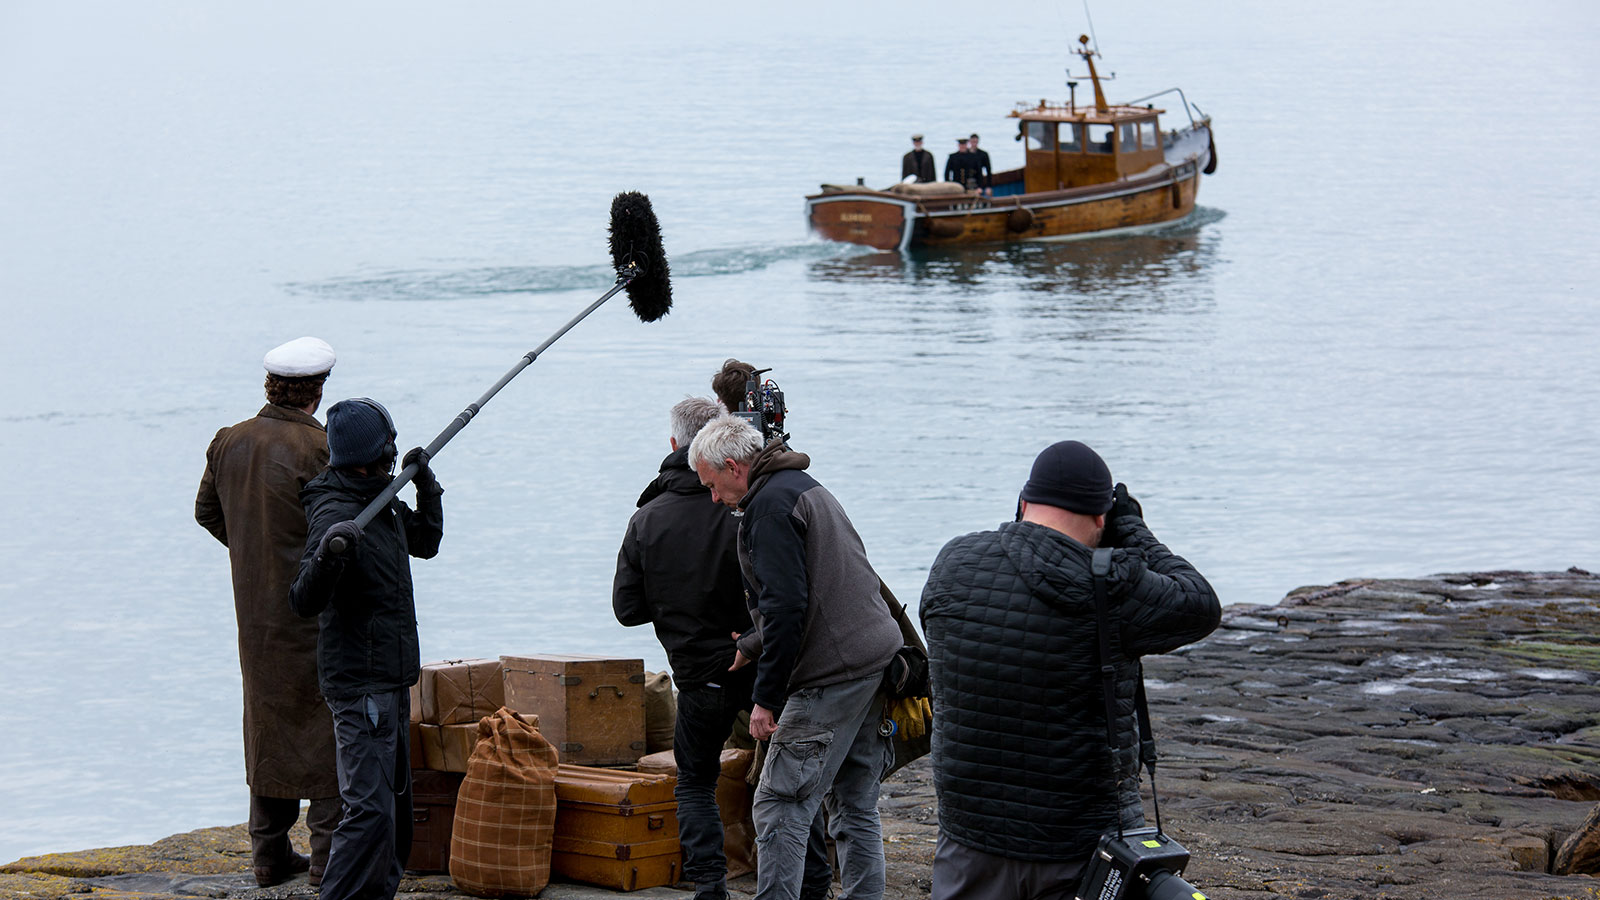 A filmcrew are filming a scene where a boat is driving off in the distance